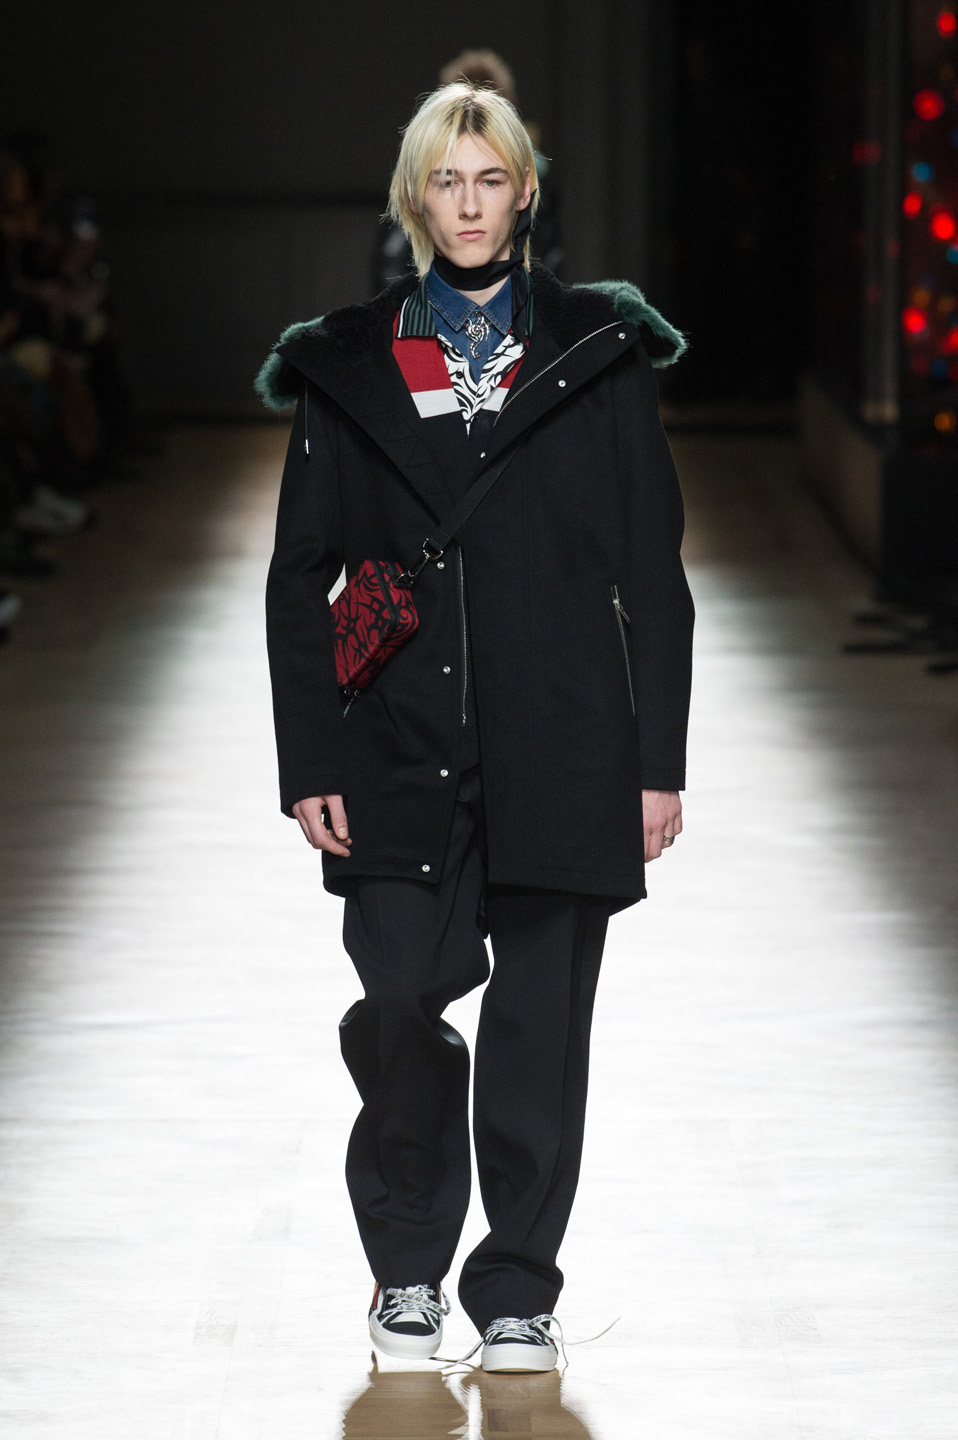 DIOR HOMME WINTER 18 19 BY PATRICE STABLE look21 Fall/WInter 2018 runway